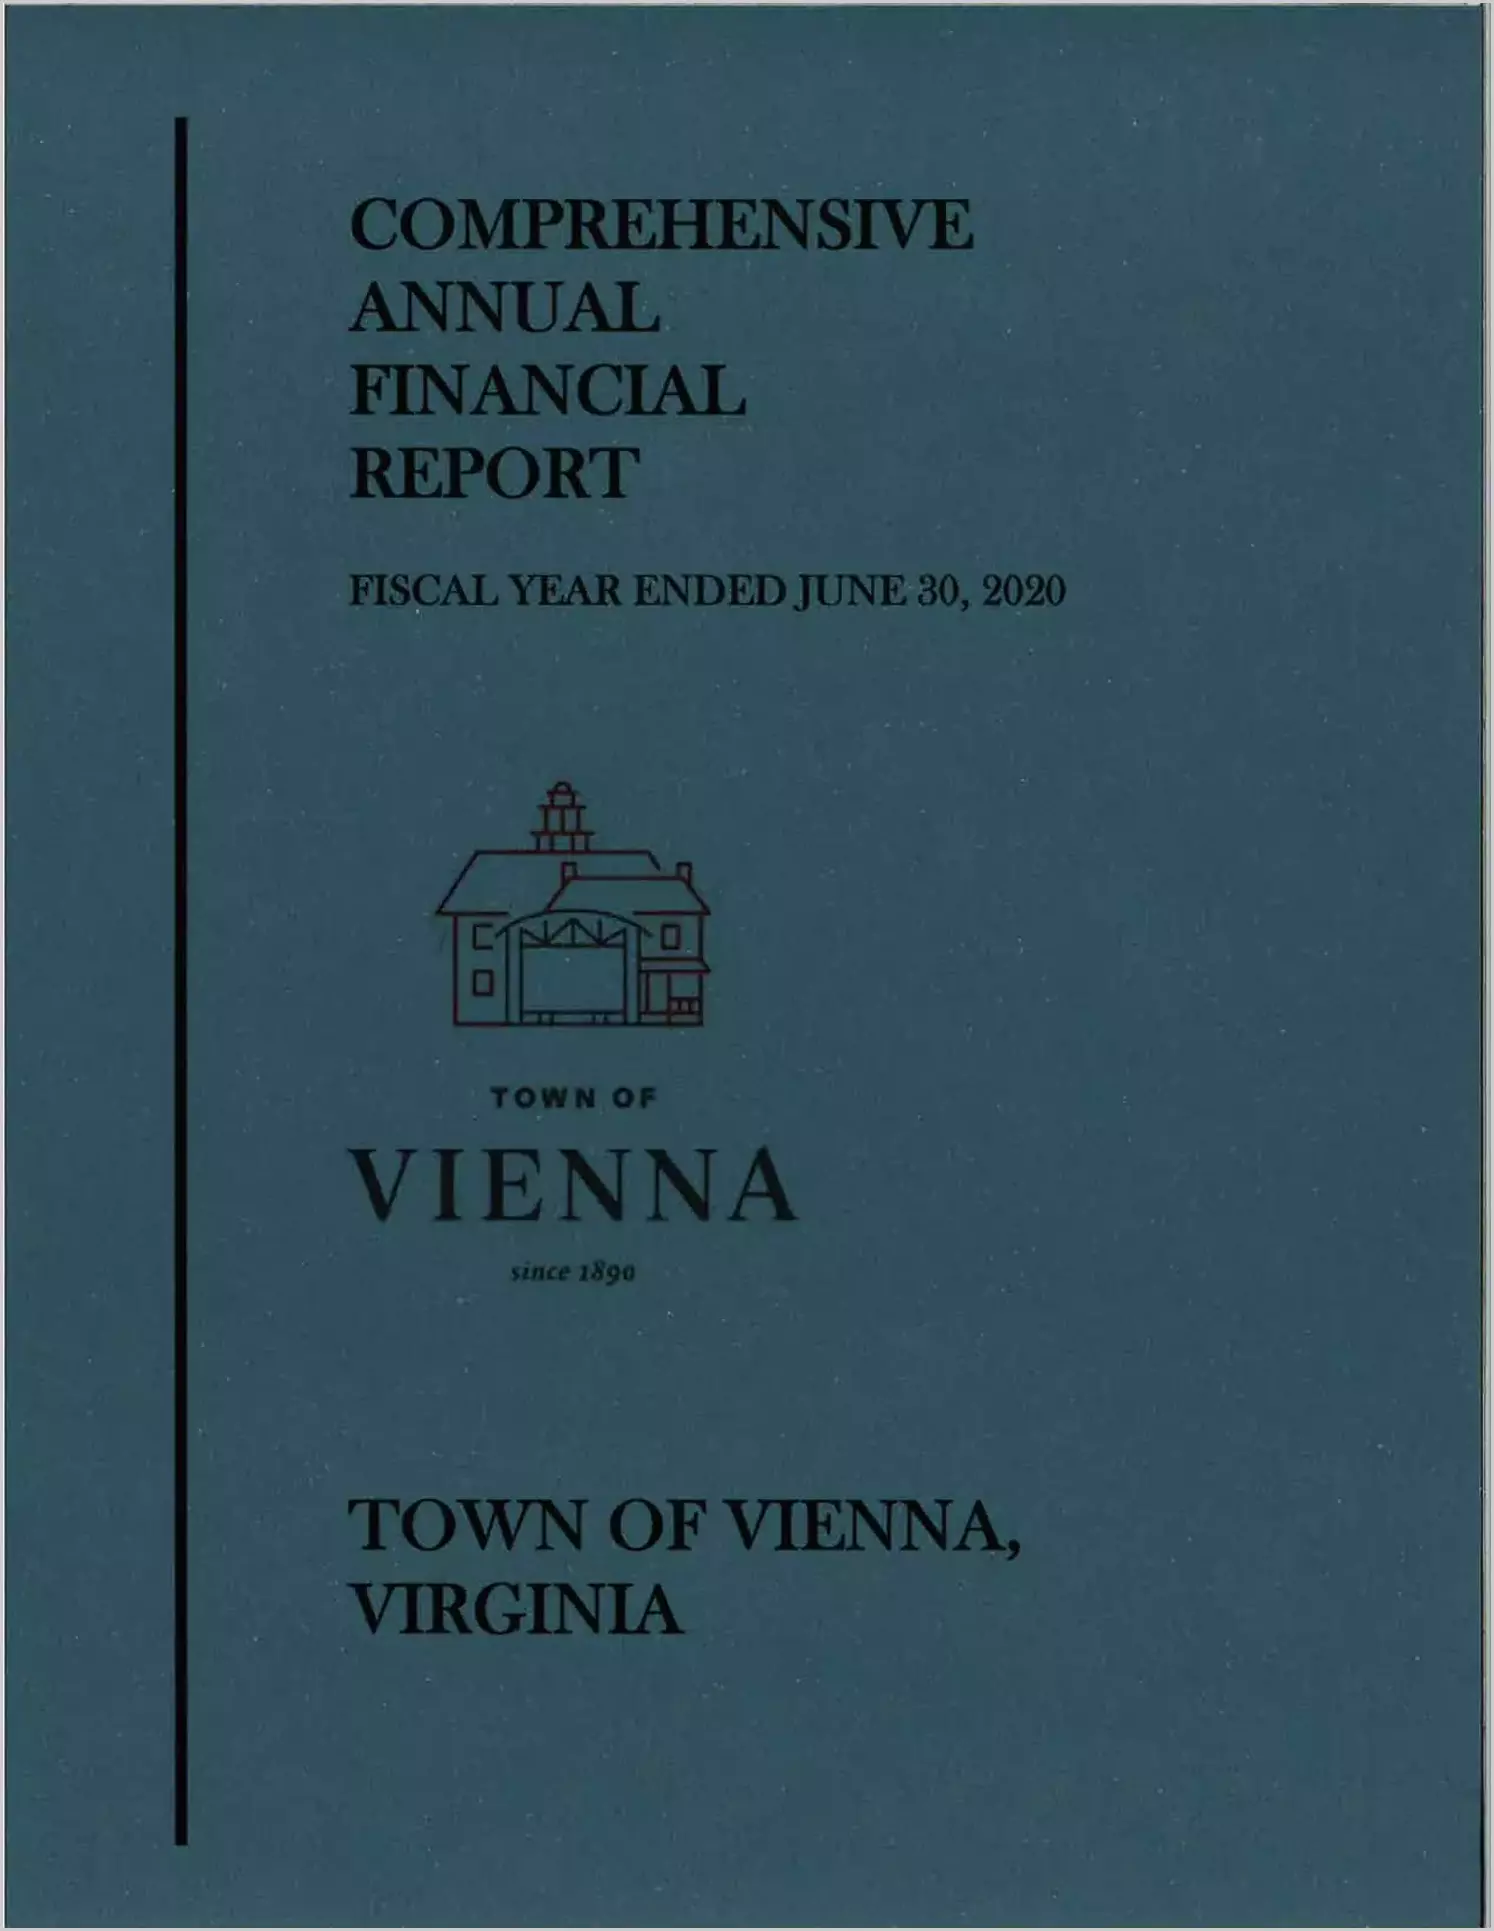 2020 Annual Financial Report for Town of Vienna